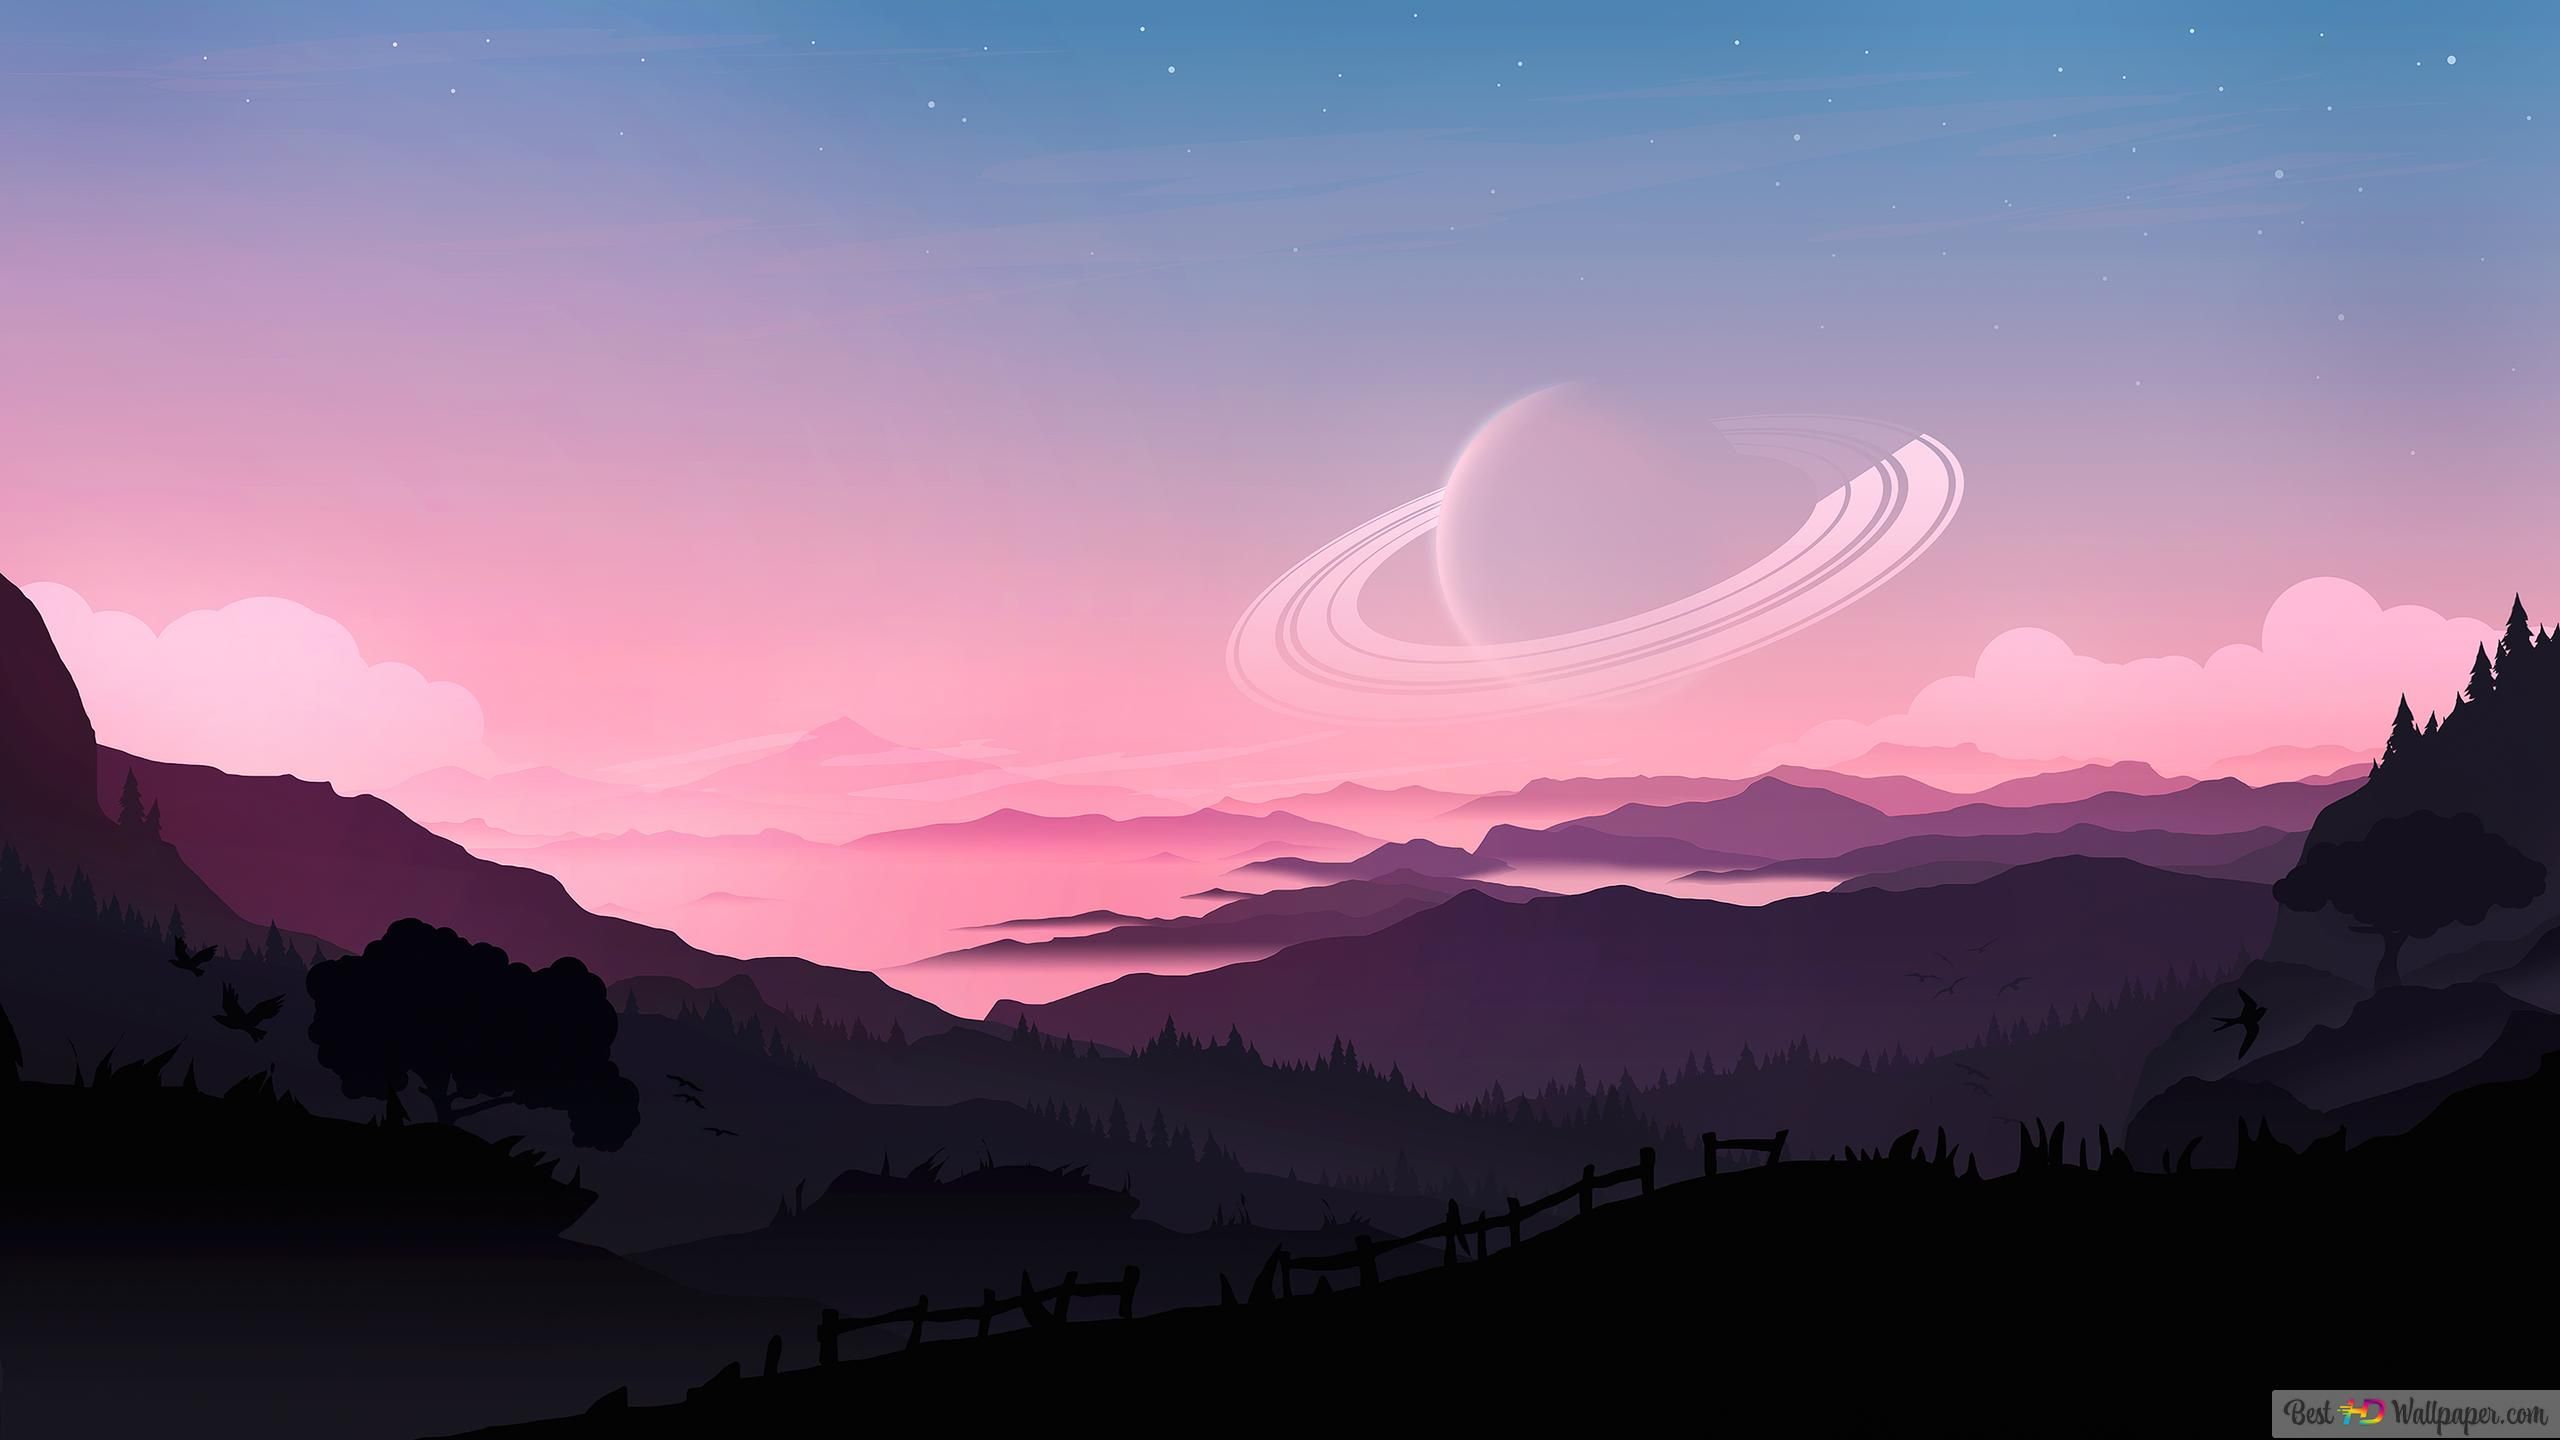 A planet above the mountains wallpaper 2560x1440 - 2560x1440